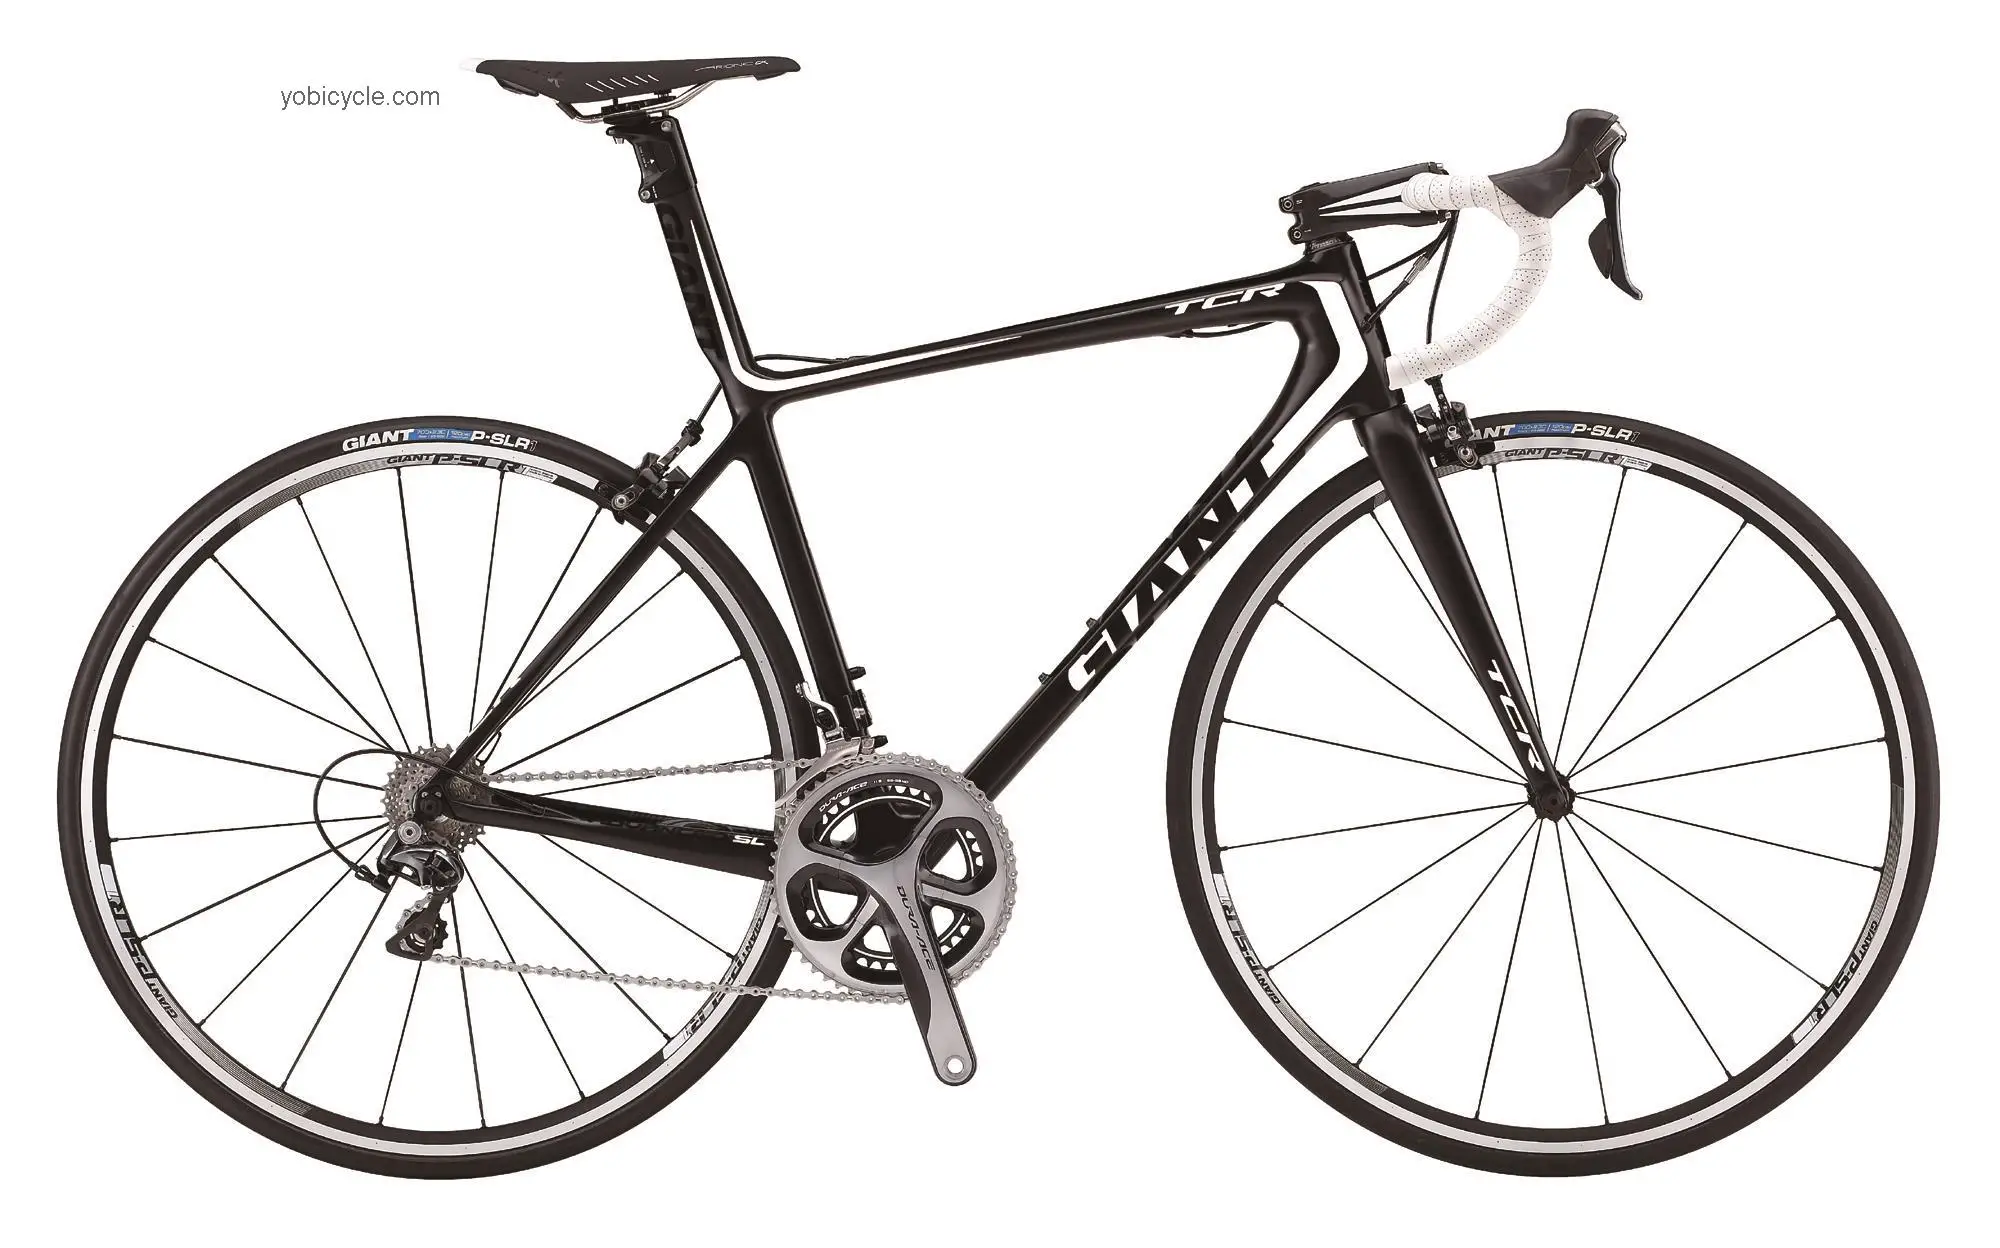 Giant TCR Advanced SL 1 2013 comparison online with competitors